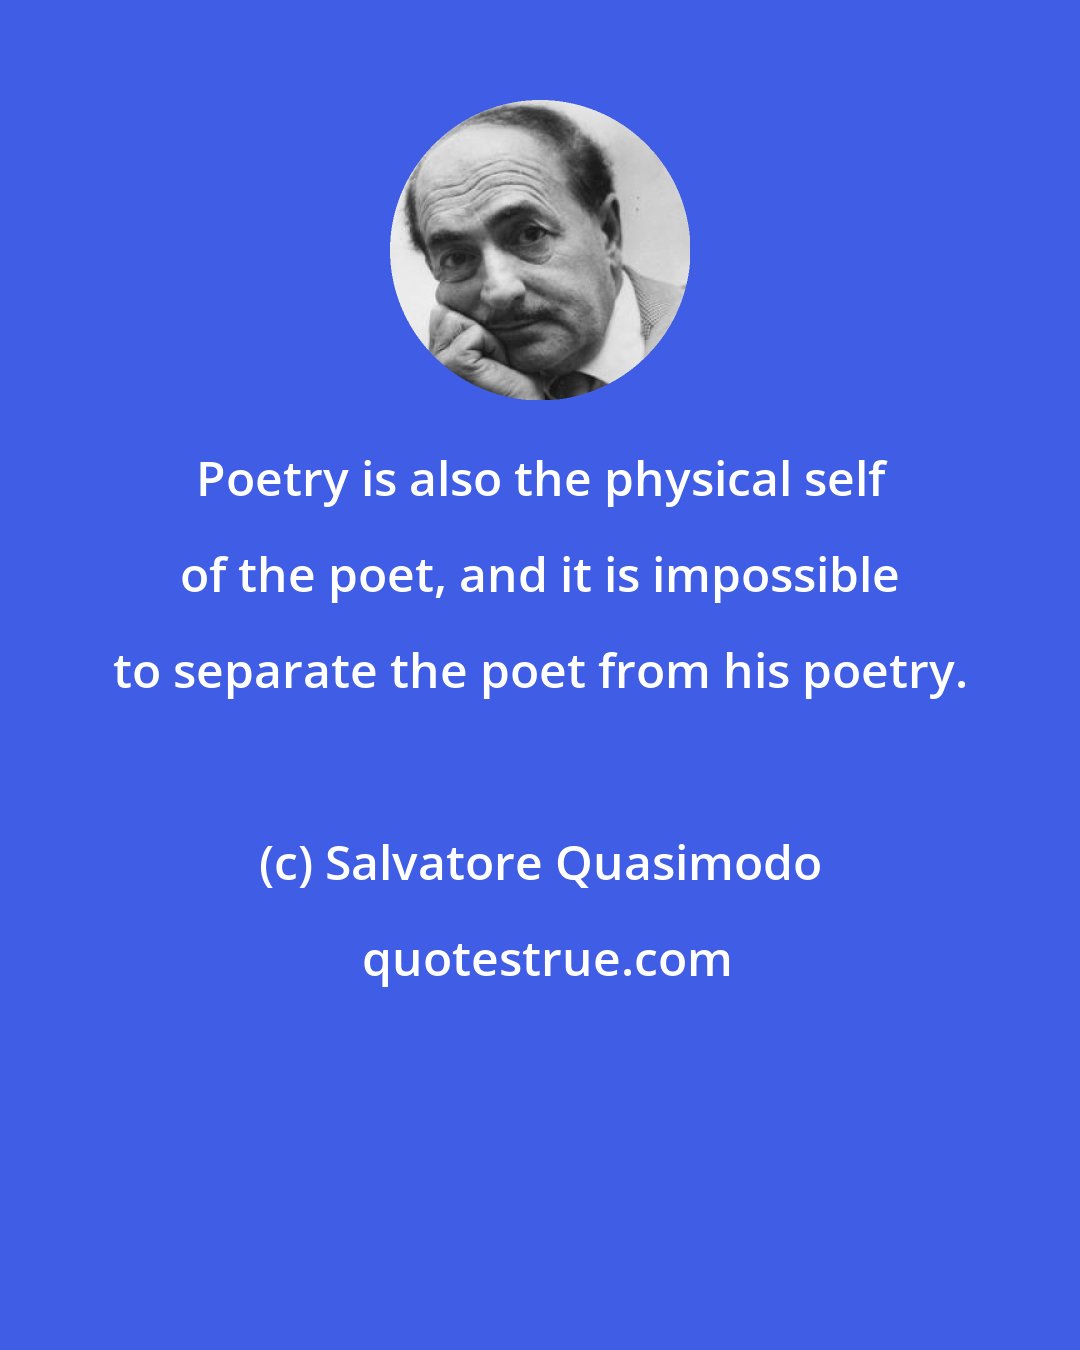 Salvatore Quasimodo: Poetry is also the physical self of the poet, and it is impossible to separate the poet from his poetry.